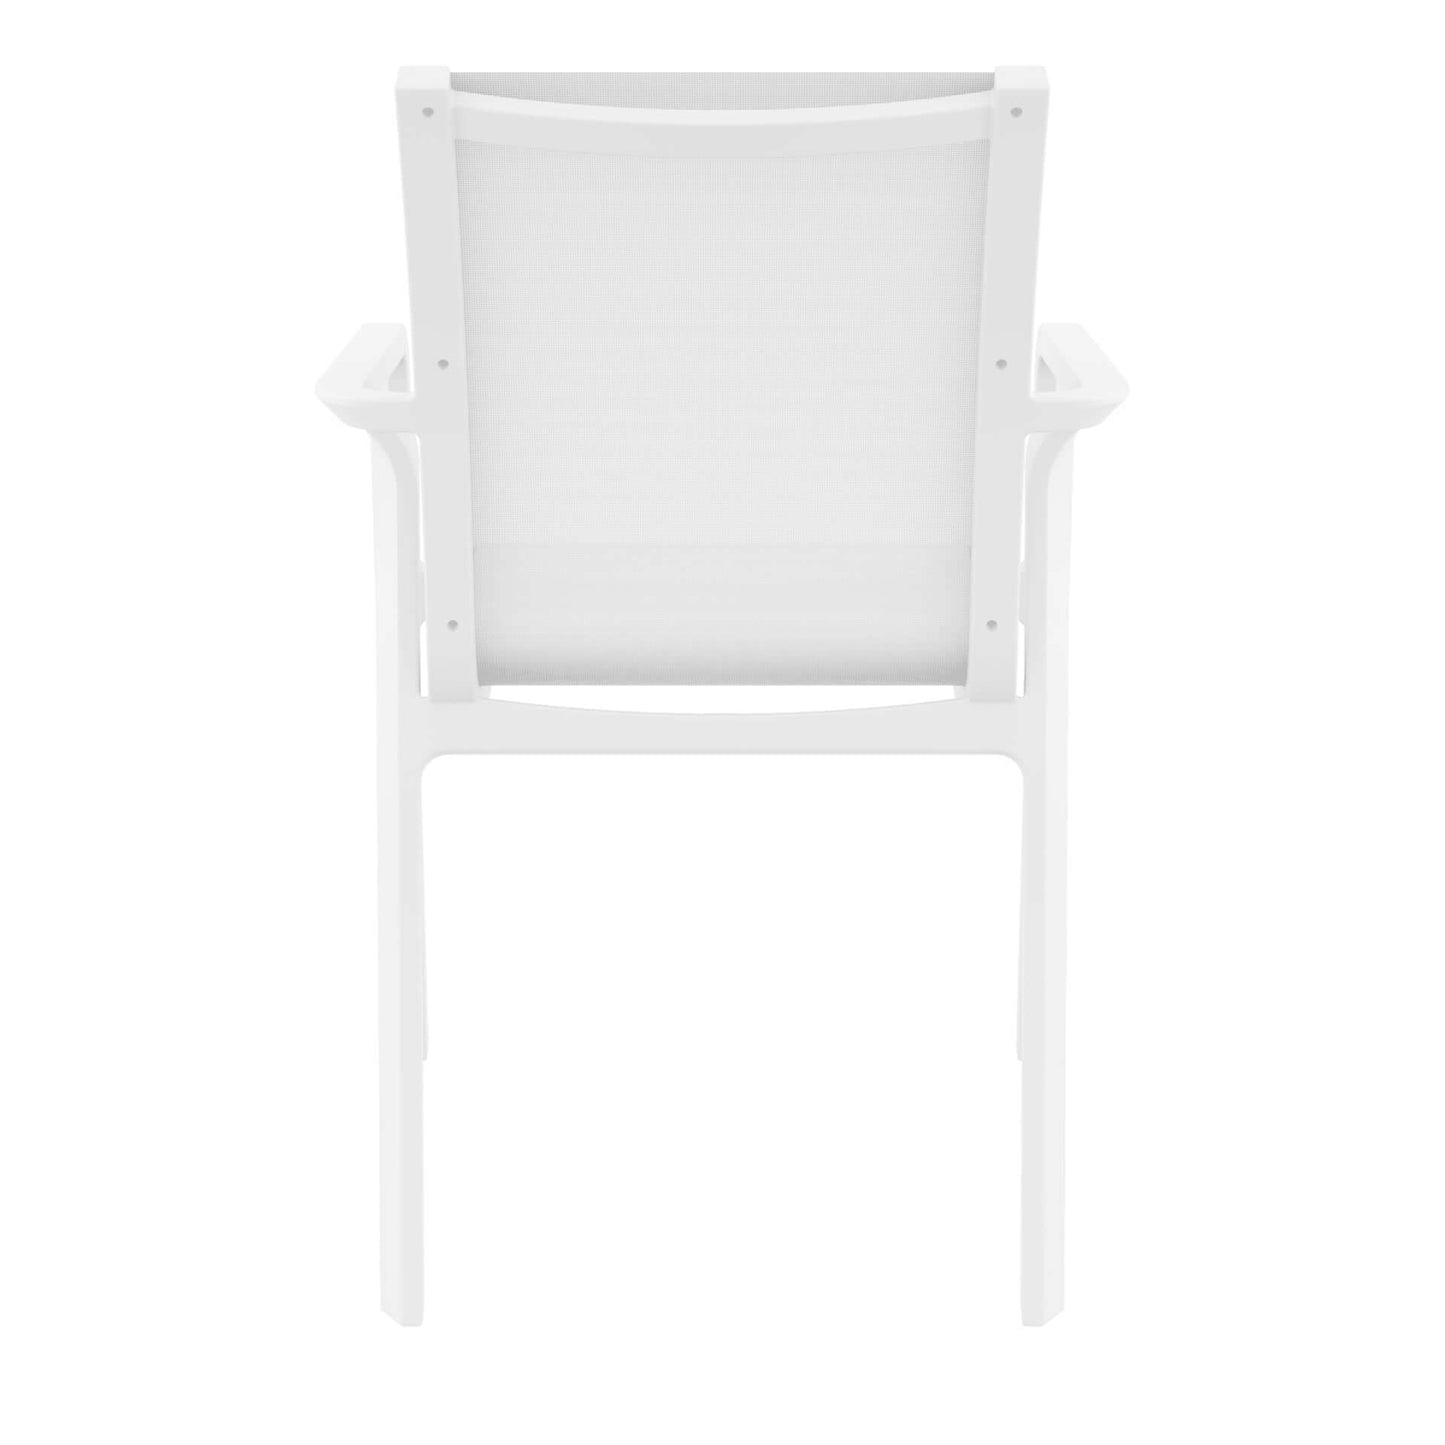 Derby | Modern, Stackable Outdoor Dining Chairs With Arms | Set Of 2 | White